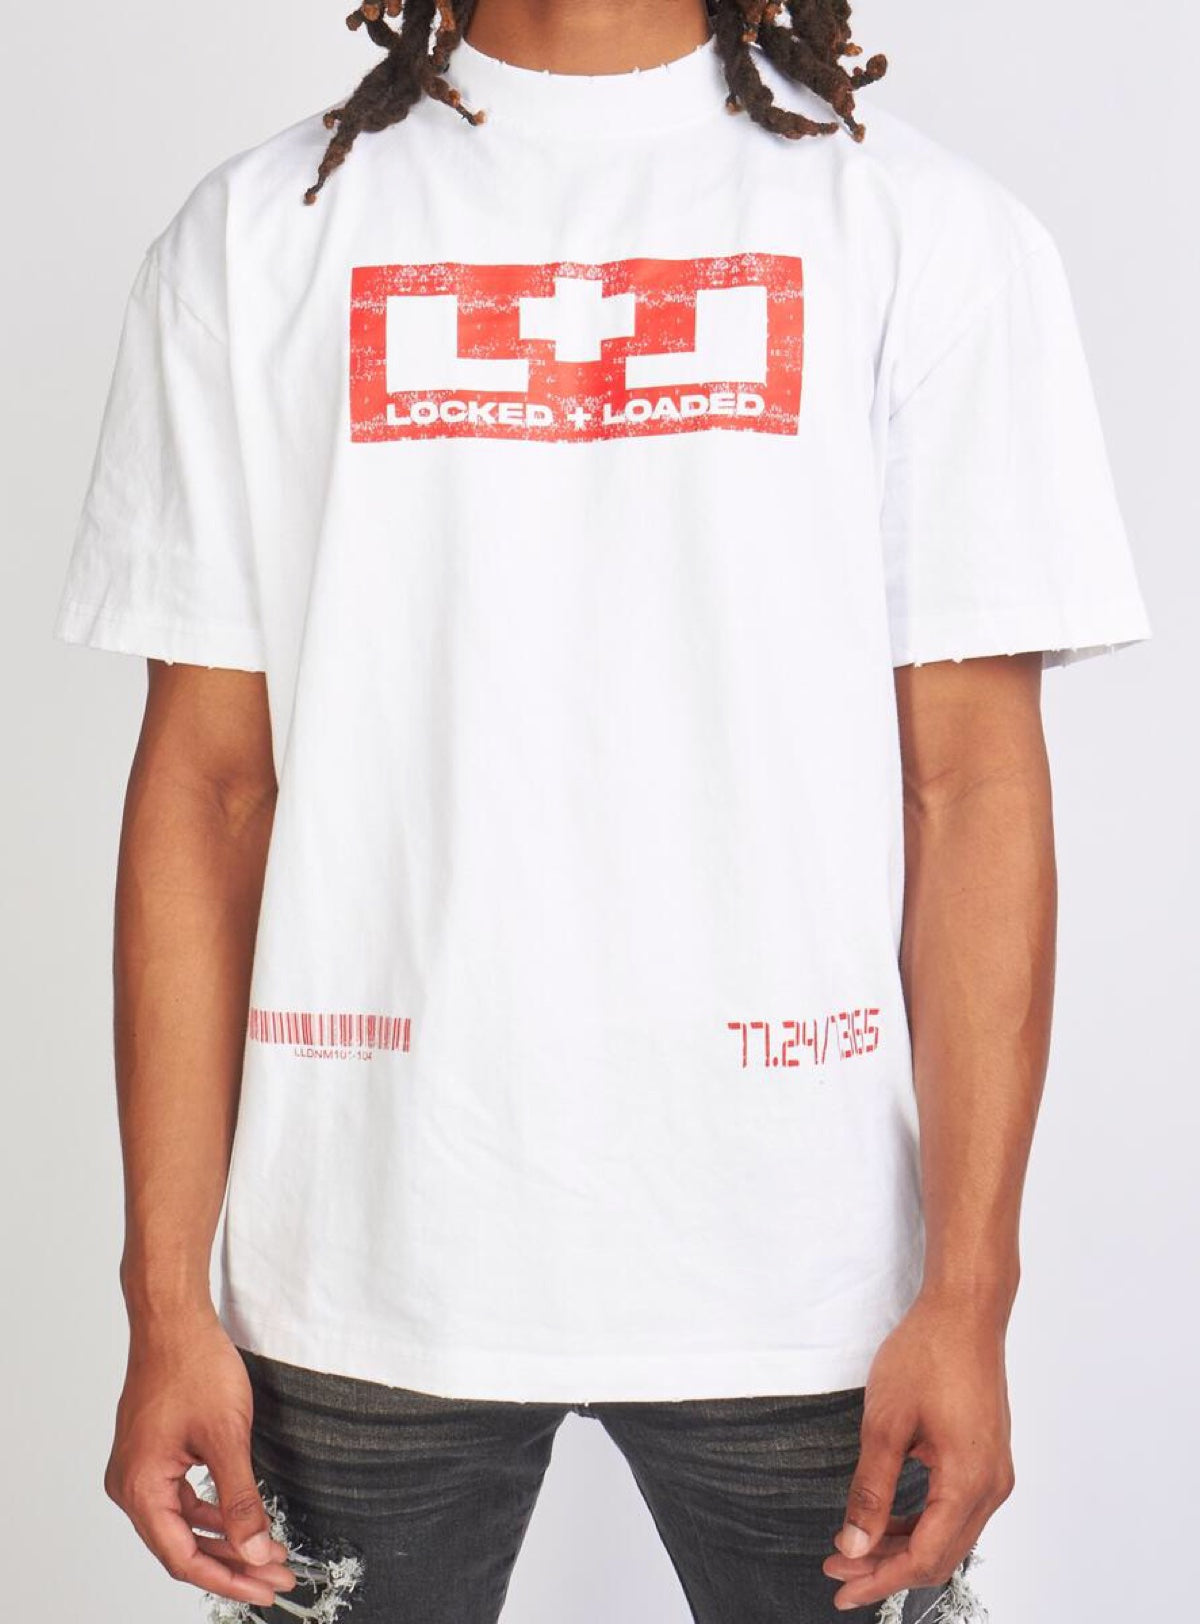 Locked & Loaded T-Shirt - Beckman - Oversized - White And Red - 104